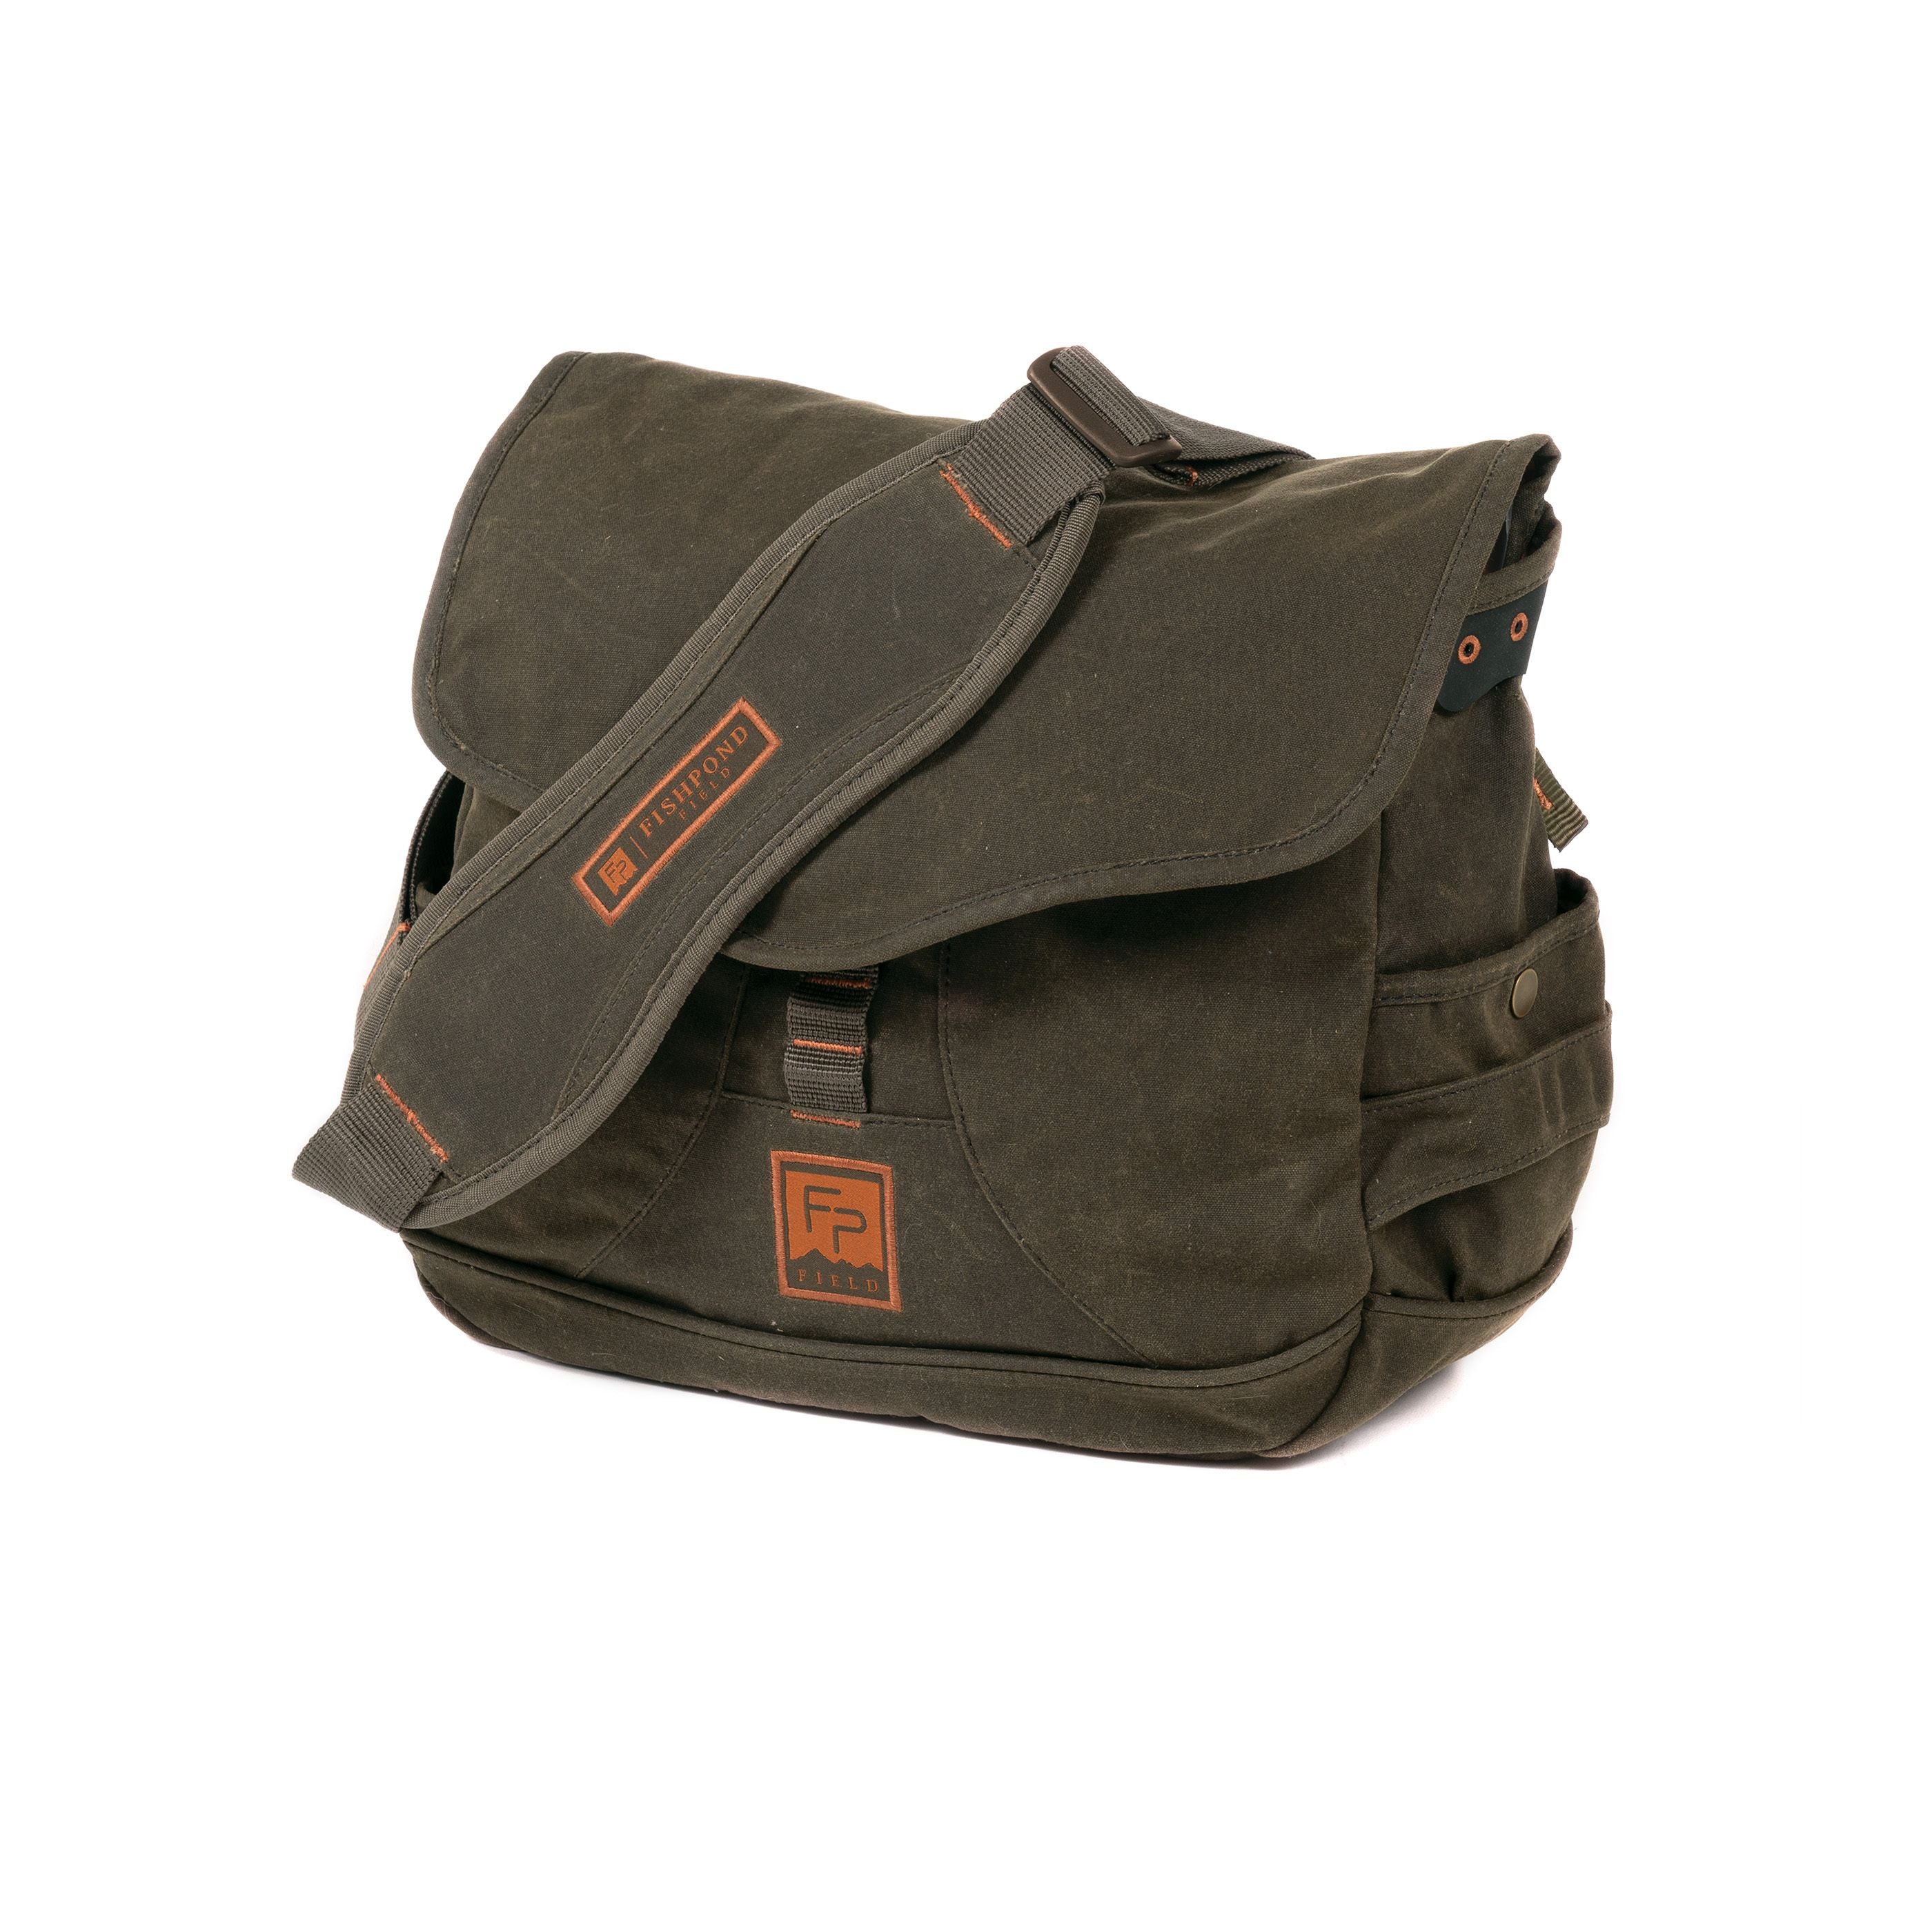 Fishpond Lodgepole Fishing Satchel  The North American Fly Fishing Forum -  sponsored by Thomas Turner